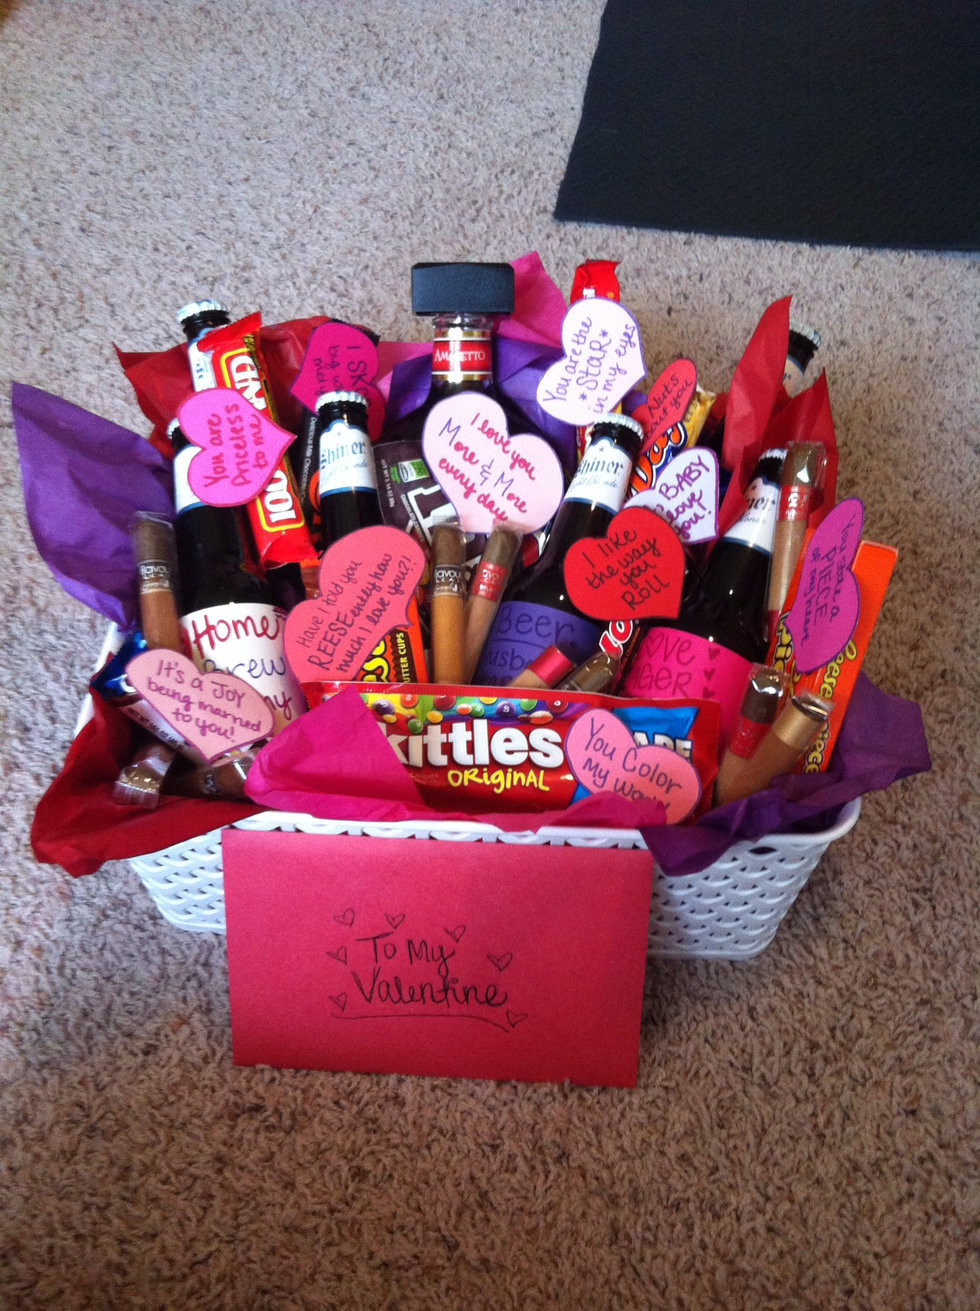 Valentines Day Ideas For Boyfriend
 25 Ideas for Cute Gift Ideas for Your Boyfriend Home